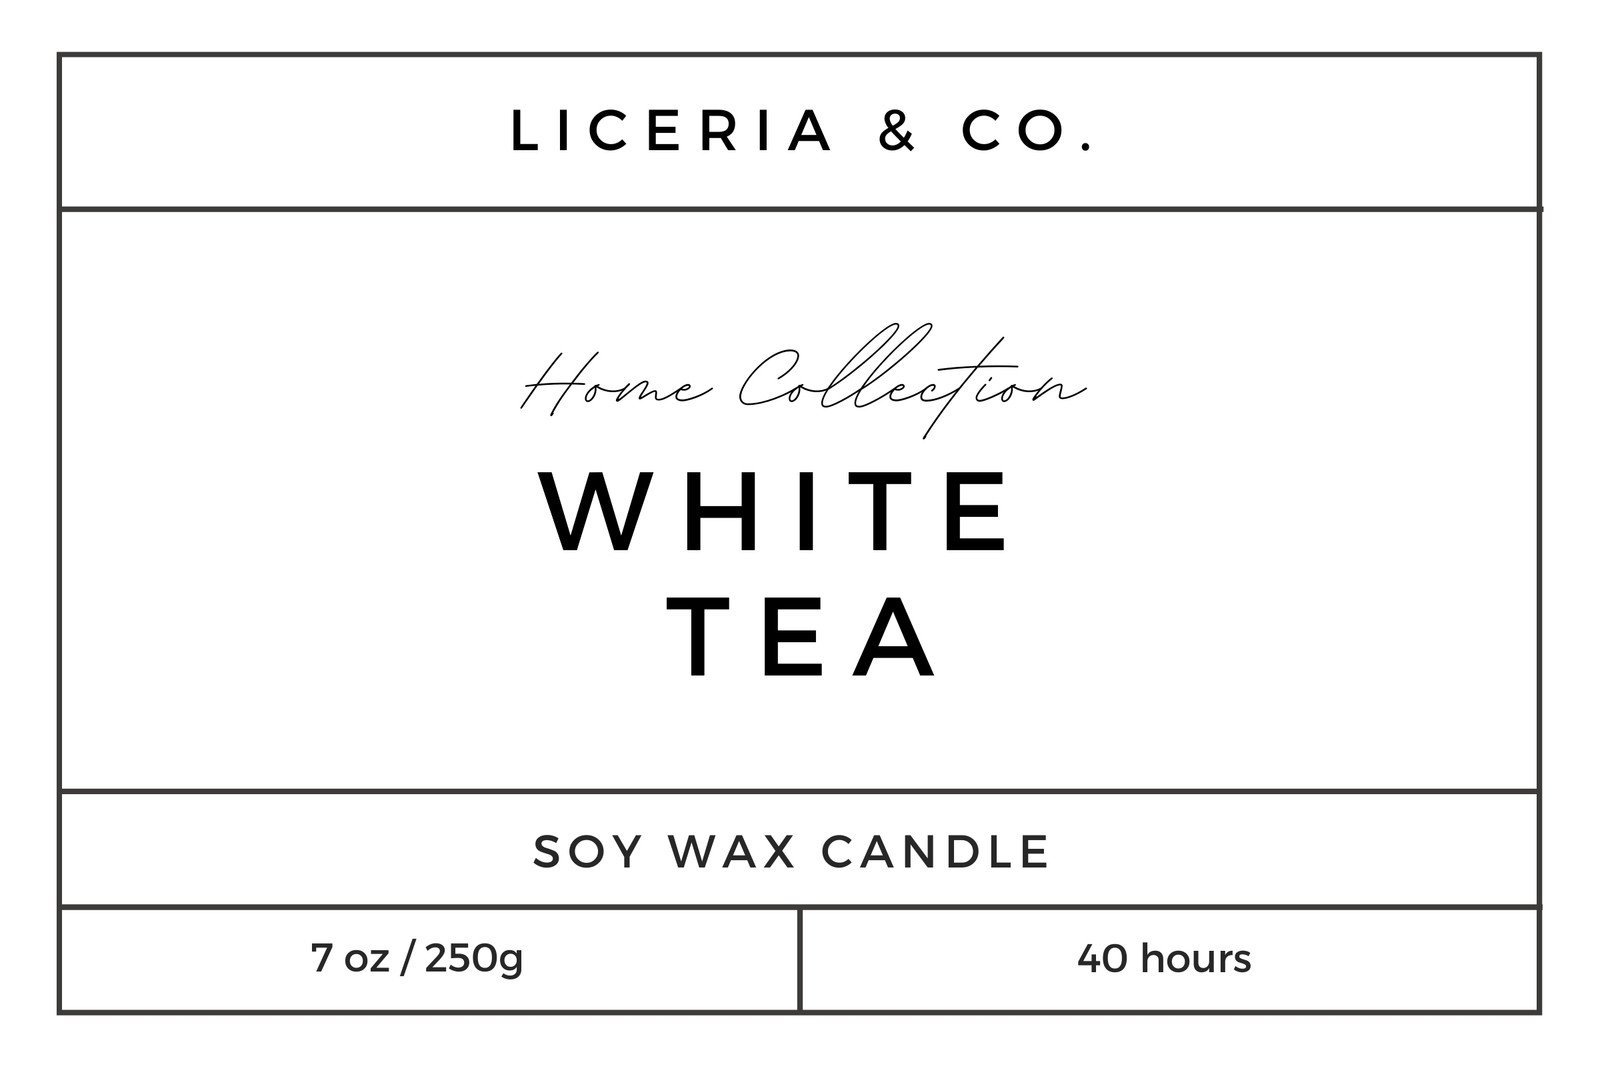 Modern Candle Label Template, Elegant Candle Label, Minimalist Candle Labels,  DIY Candle Label, Small Business, Candle Label Editable P014 